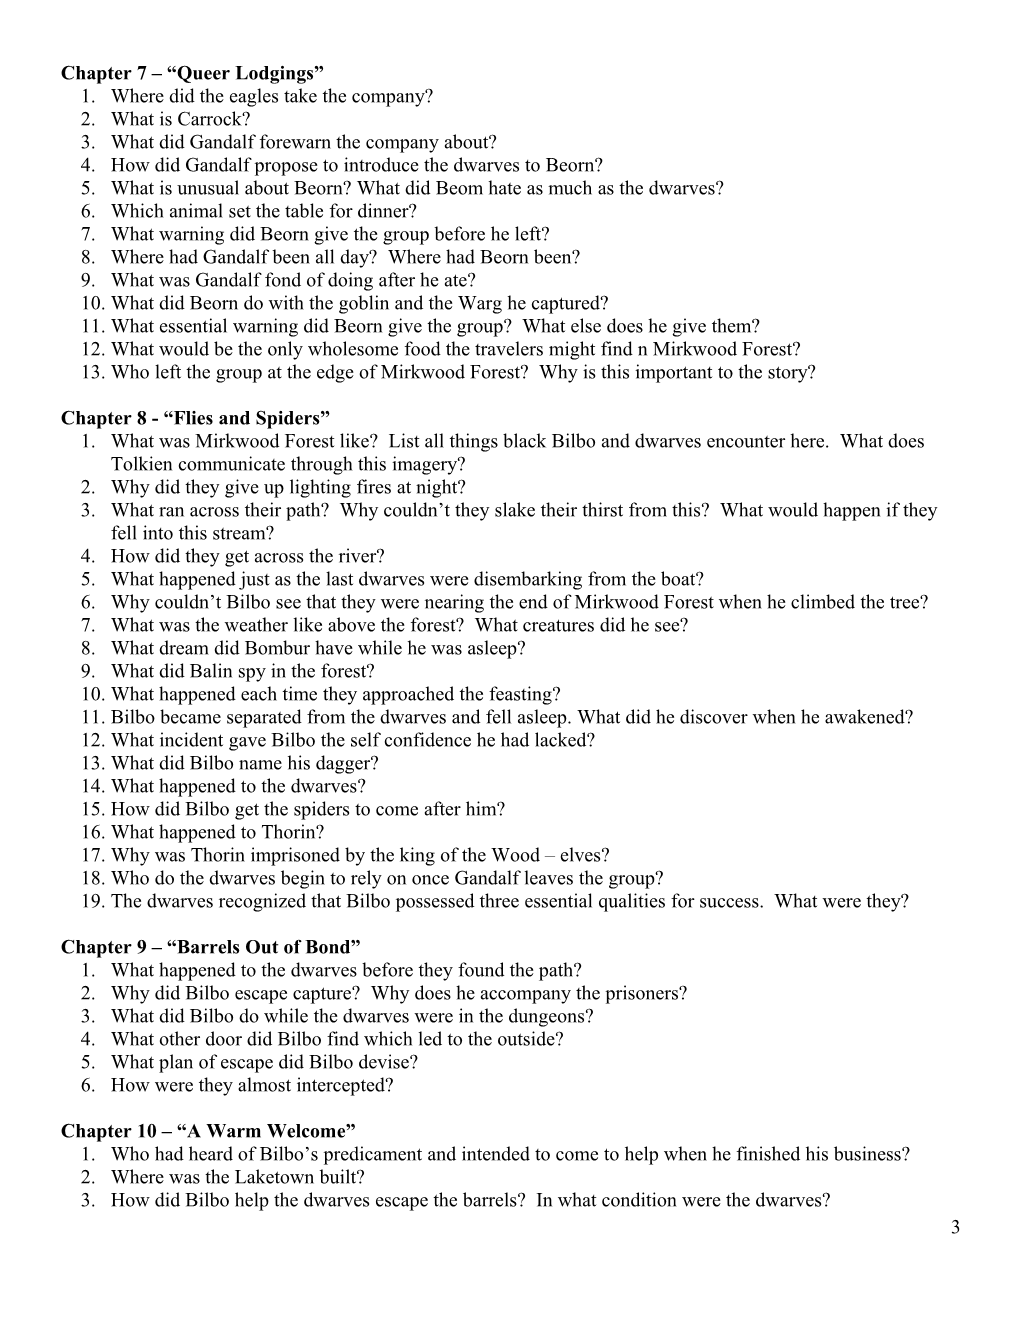 Study Guide Questions: the Hobbit by J